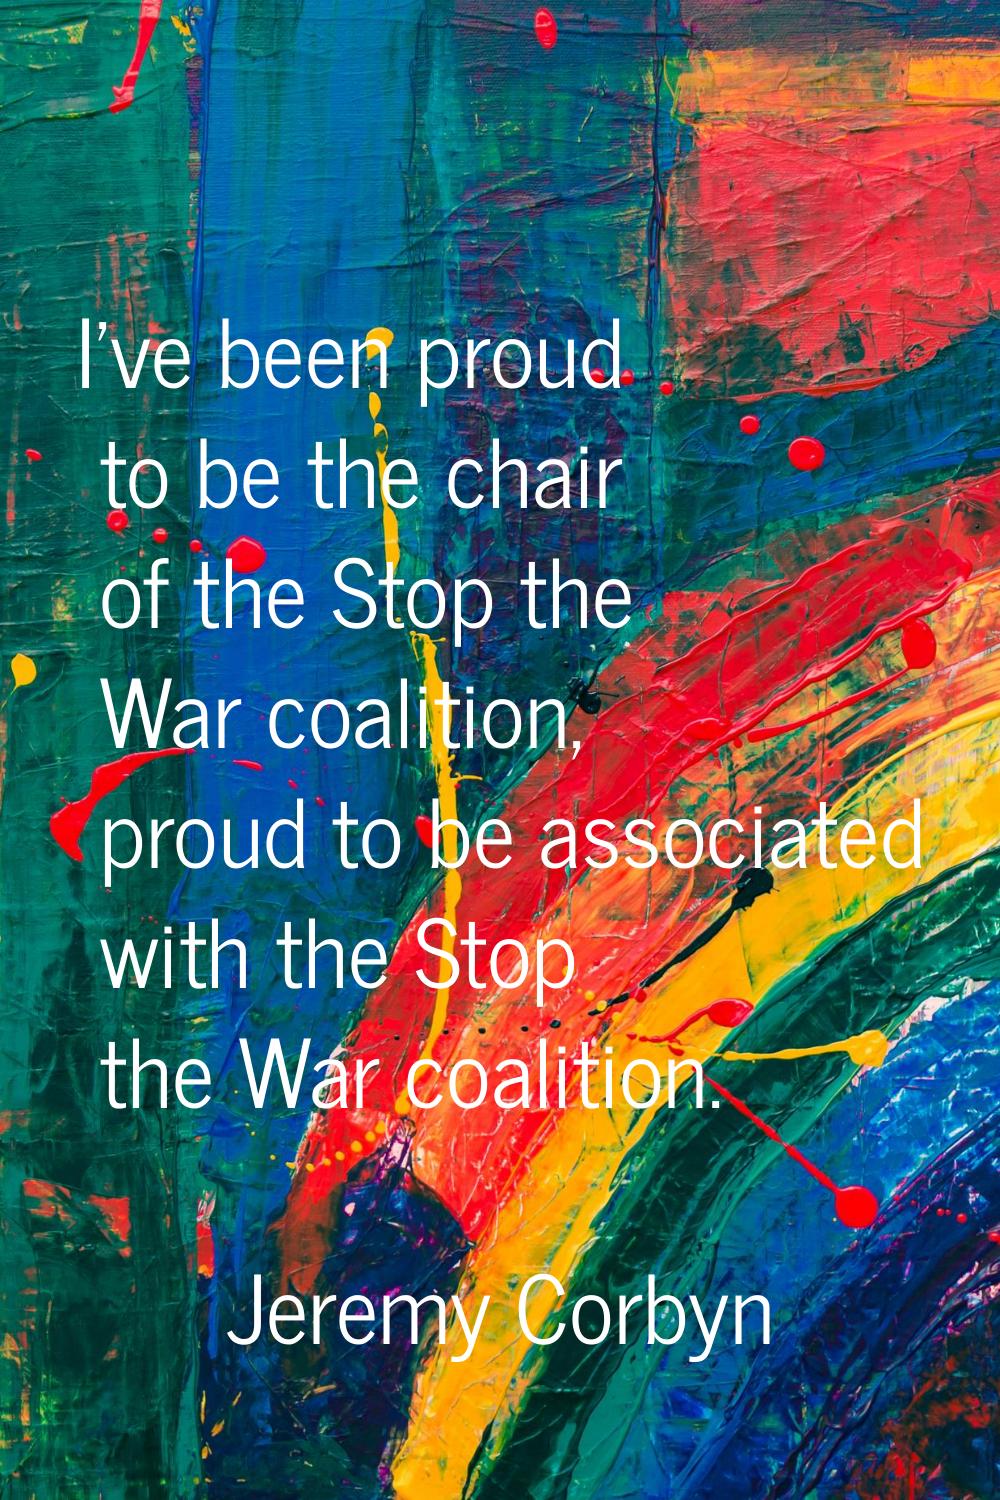 I've been proud to be the chair of the Stop the War coalition, proud to be associated with the Stop